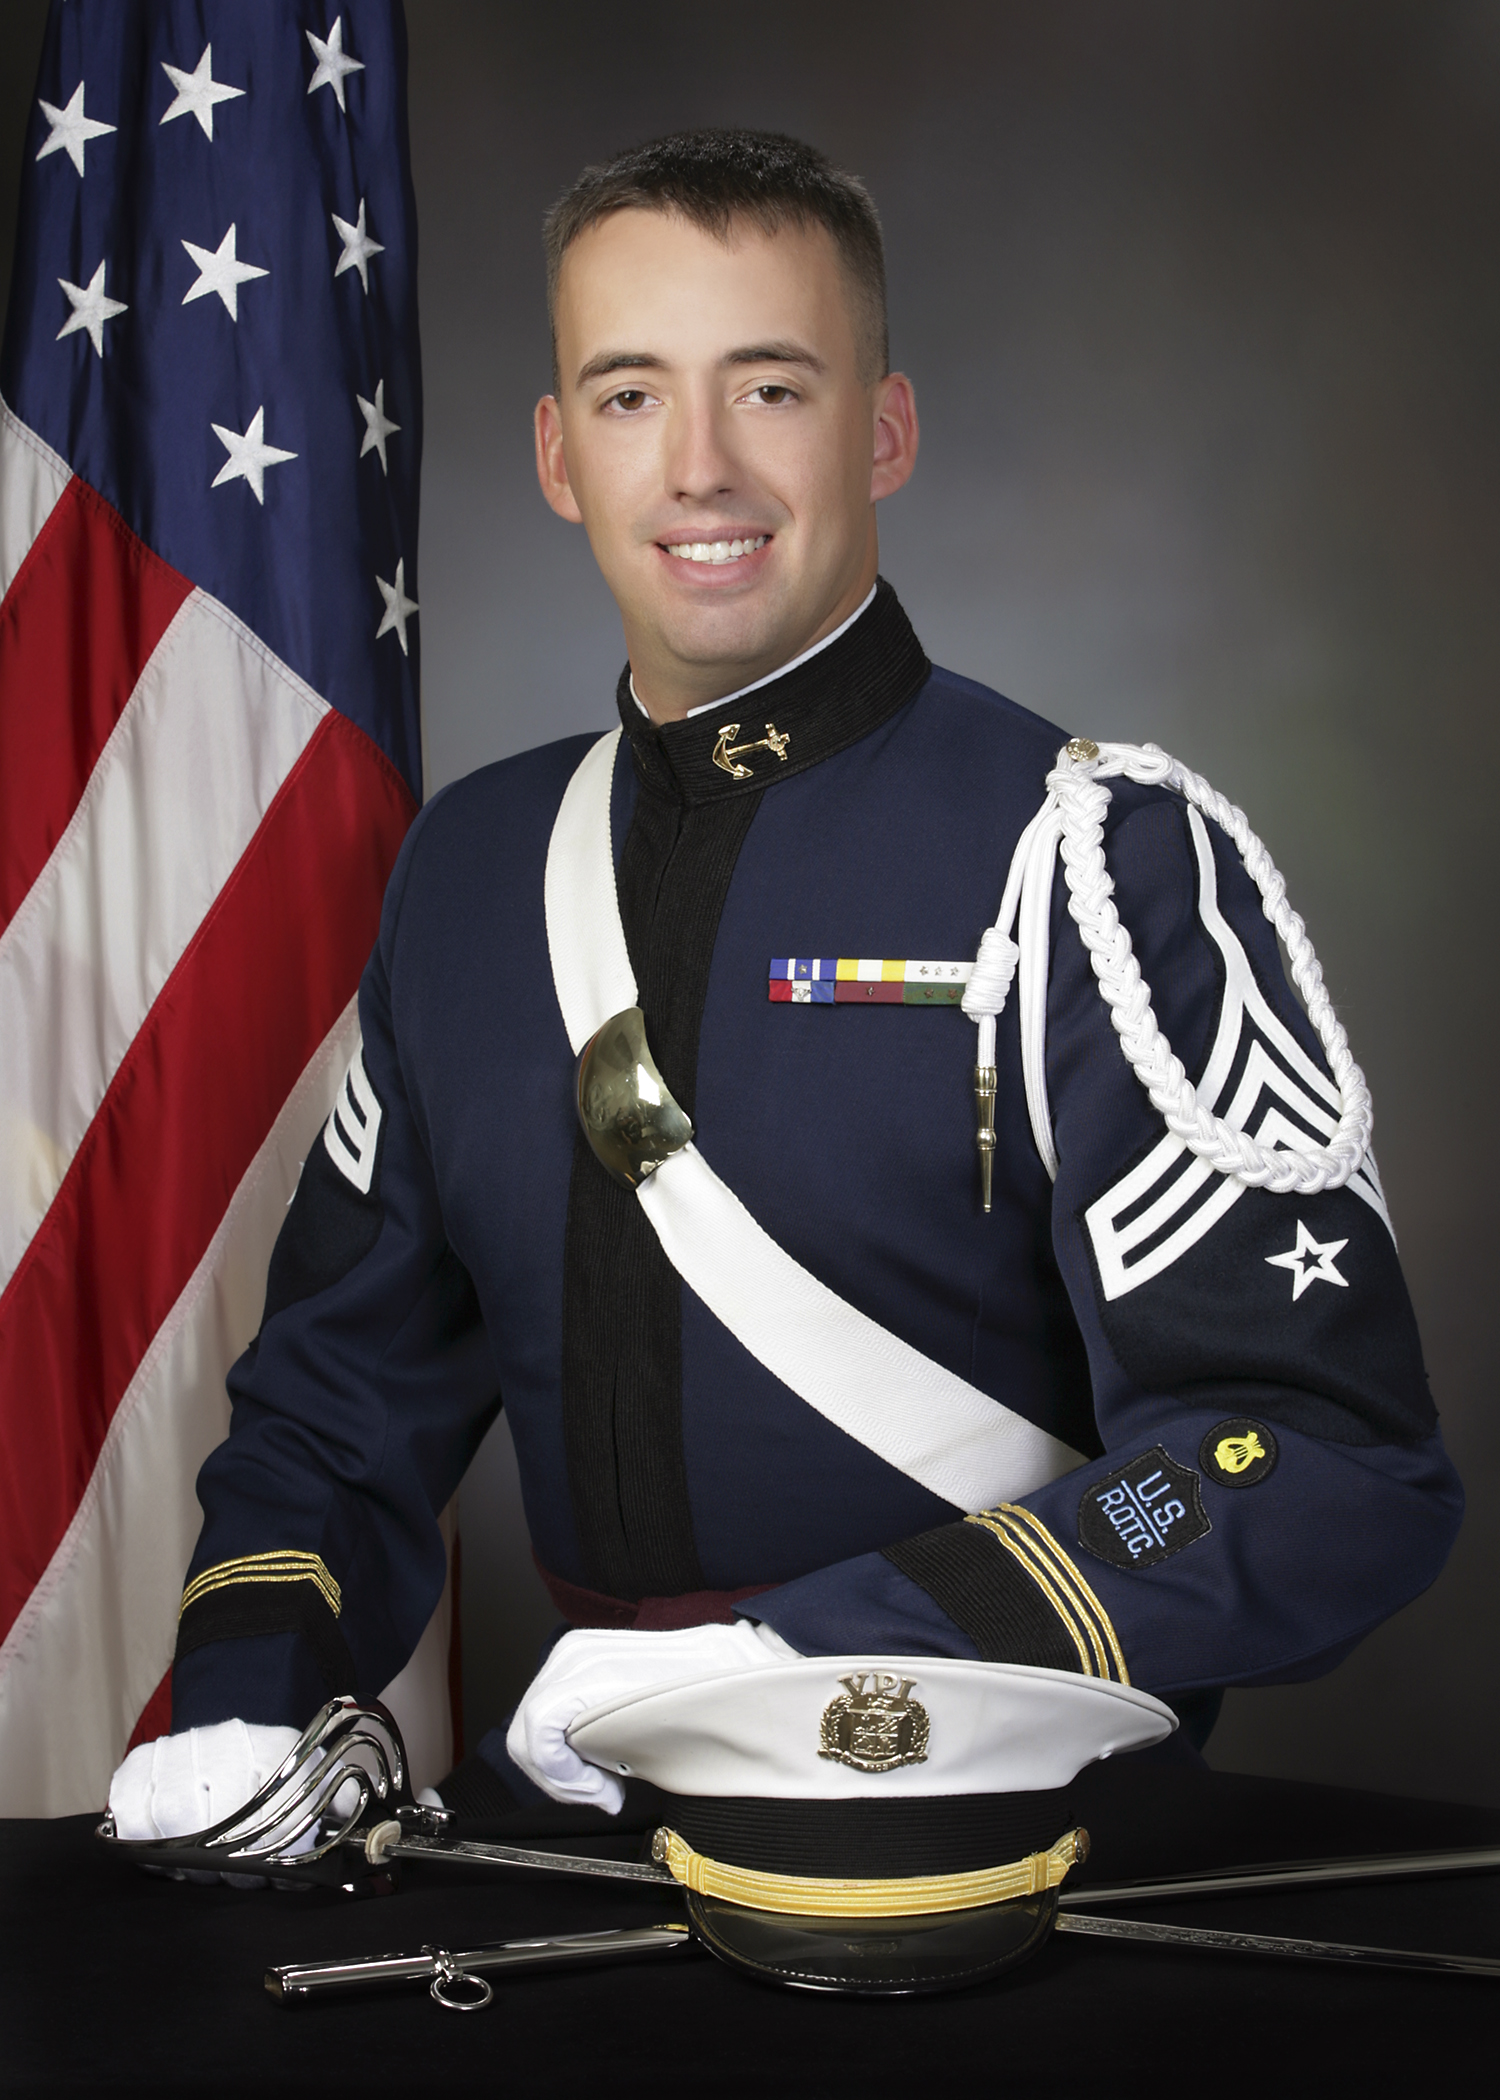 Lt. j.g. Zachary Eckhart, U.S. Navy, Virginia Tech Corps of Cadets Class of 2007 who was killed in a flight training accident in April 2010